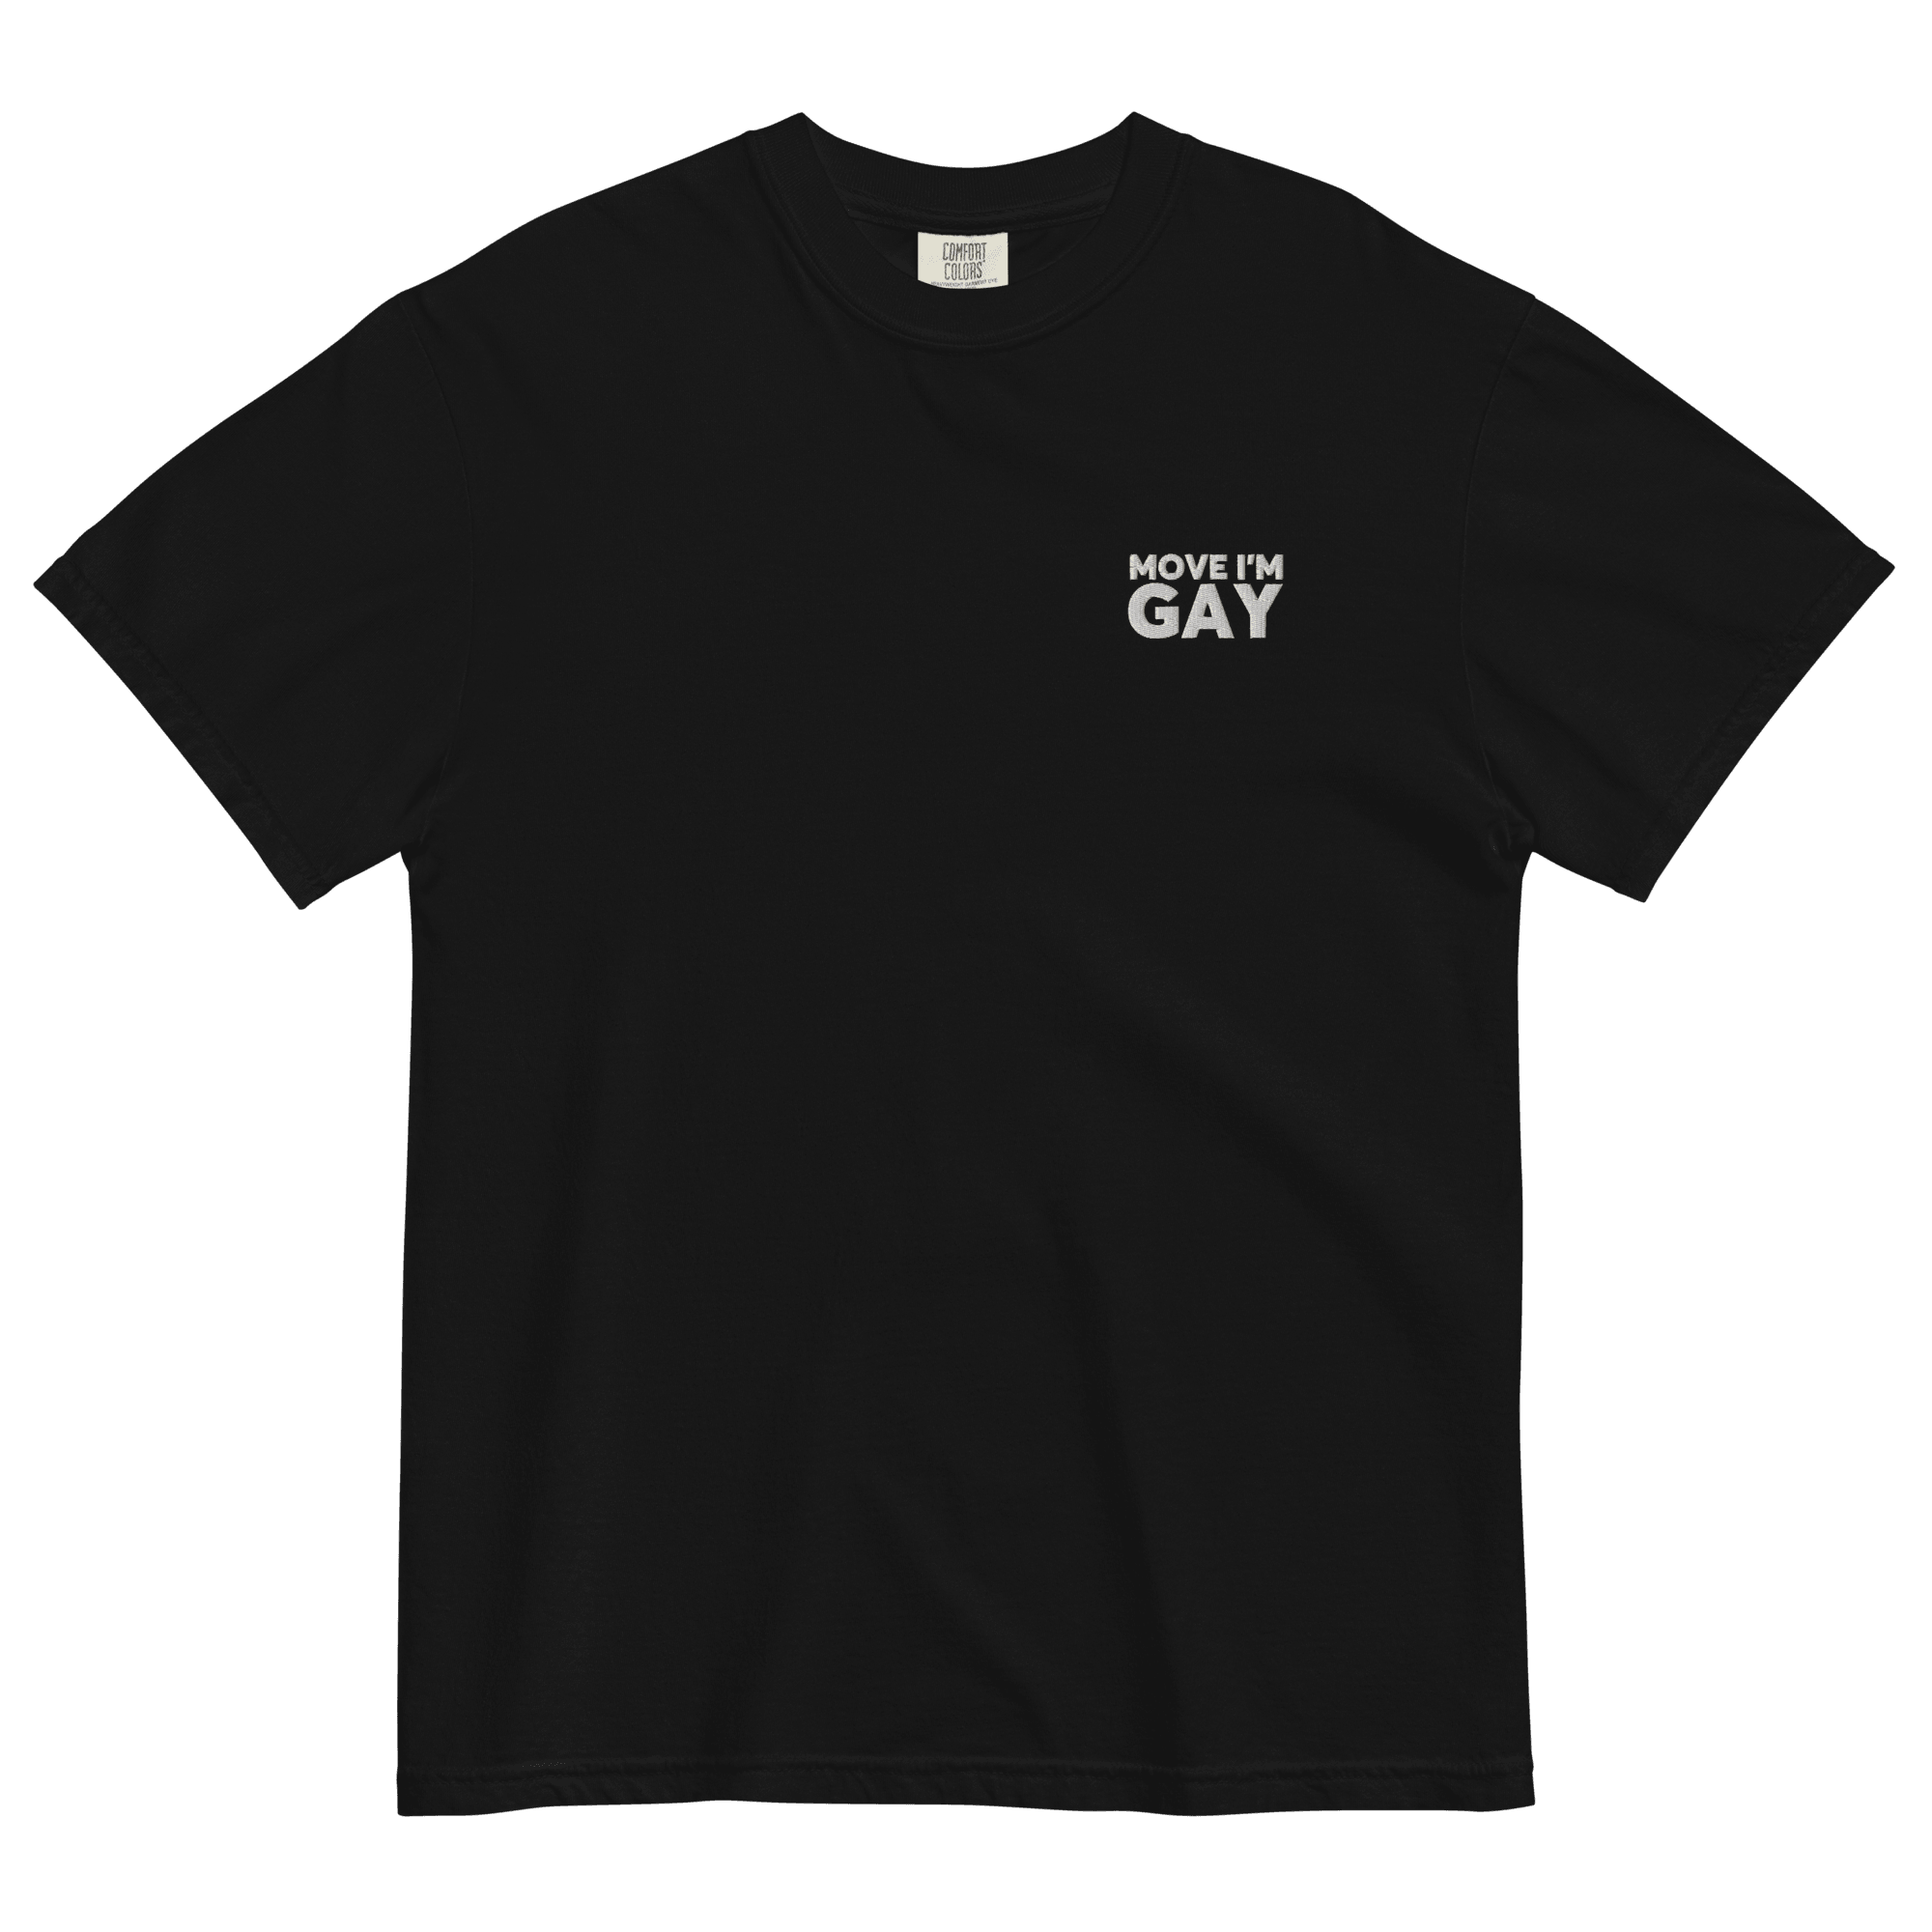 Move I'm GAY Embroidered Shirt for Pride - Polychrome Goods 🍊